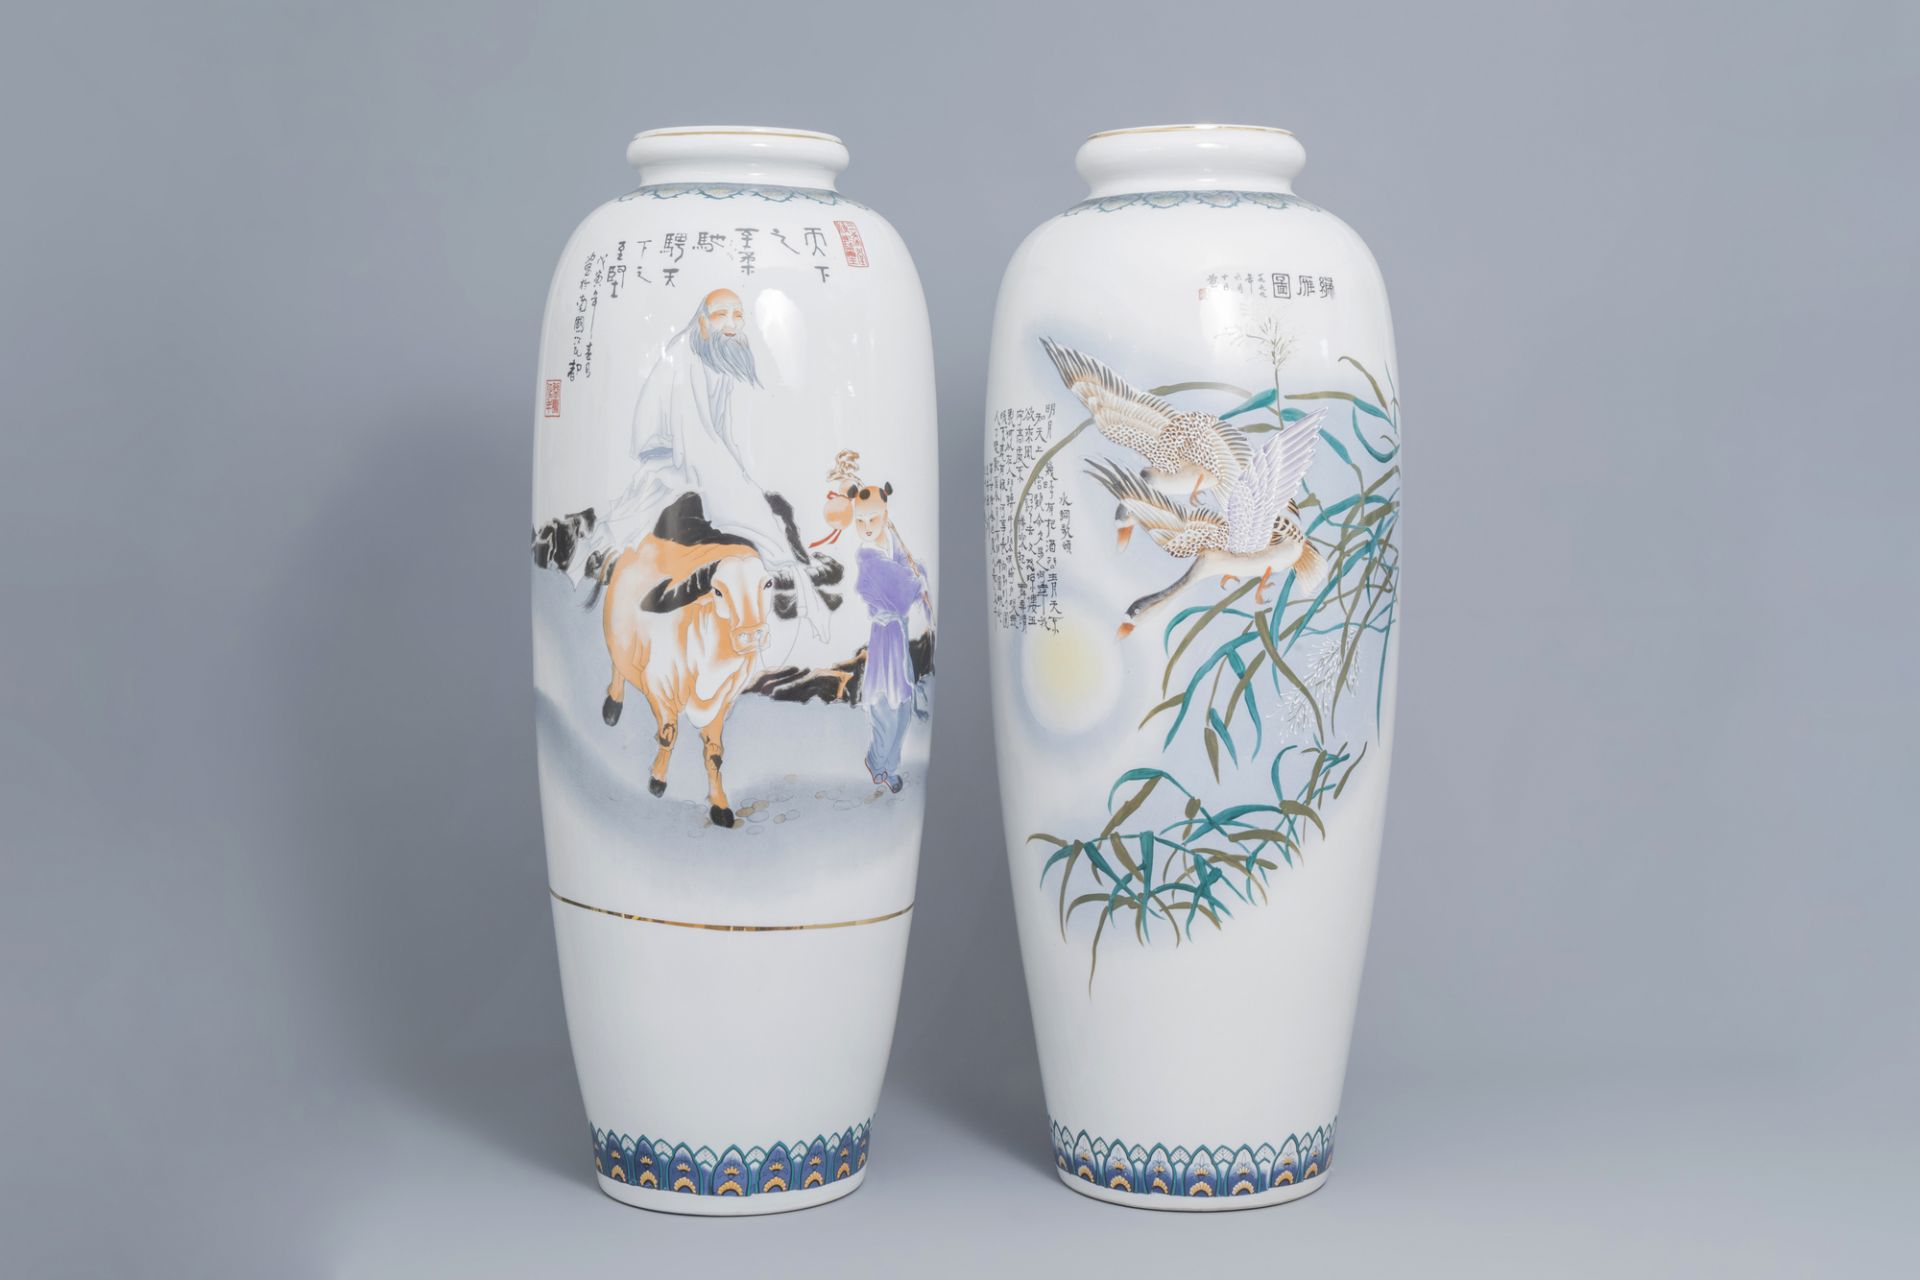 Two large Chinese polychrome vases with ducks and figures in a landscape, 20th C.